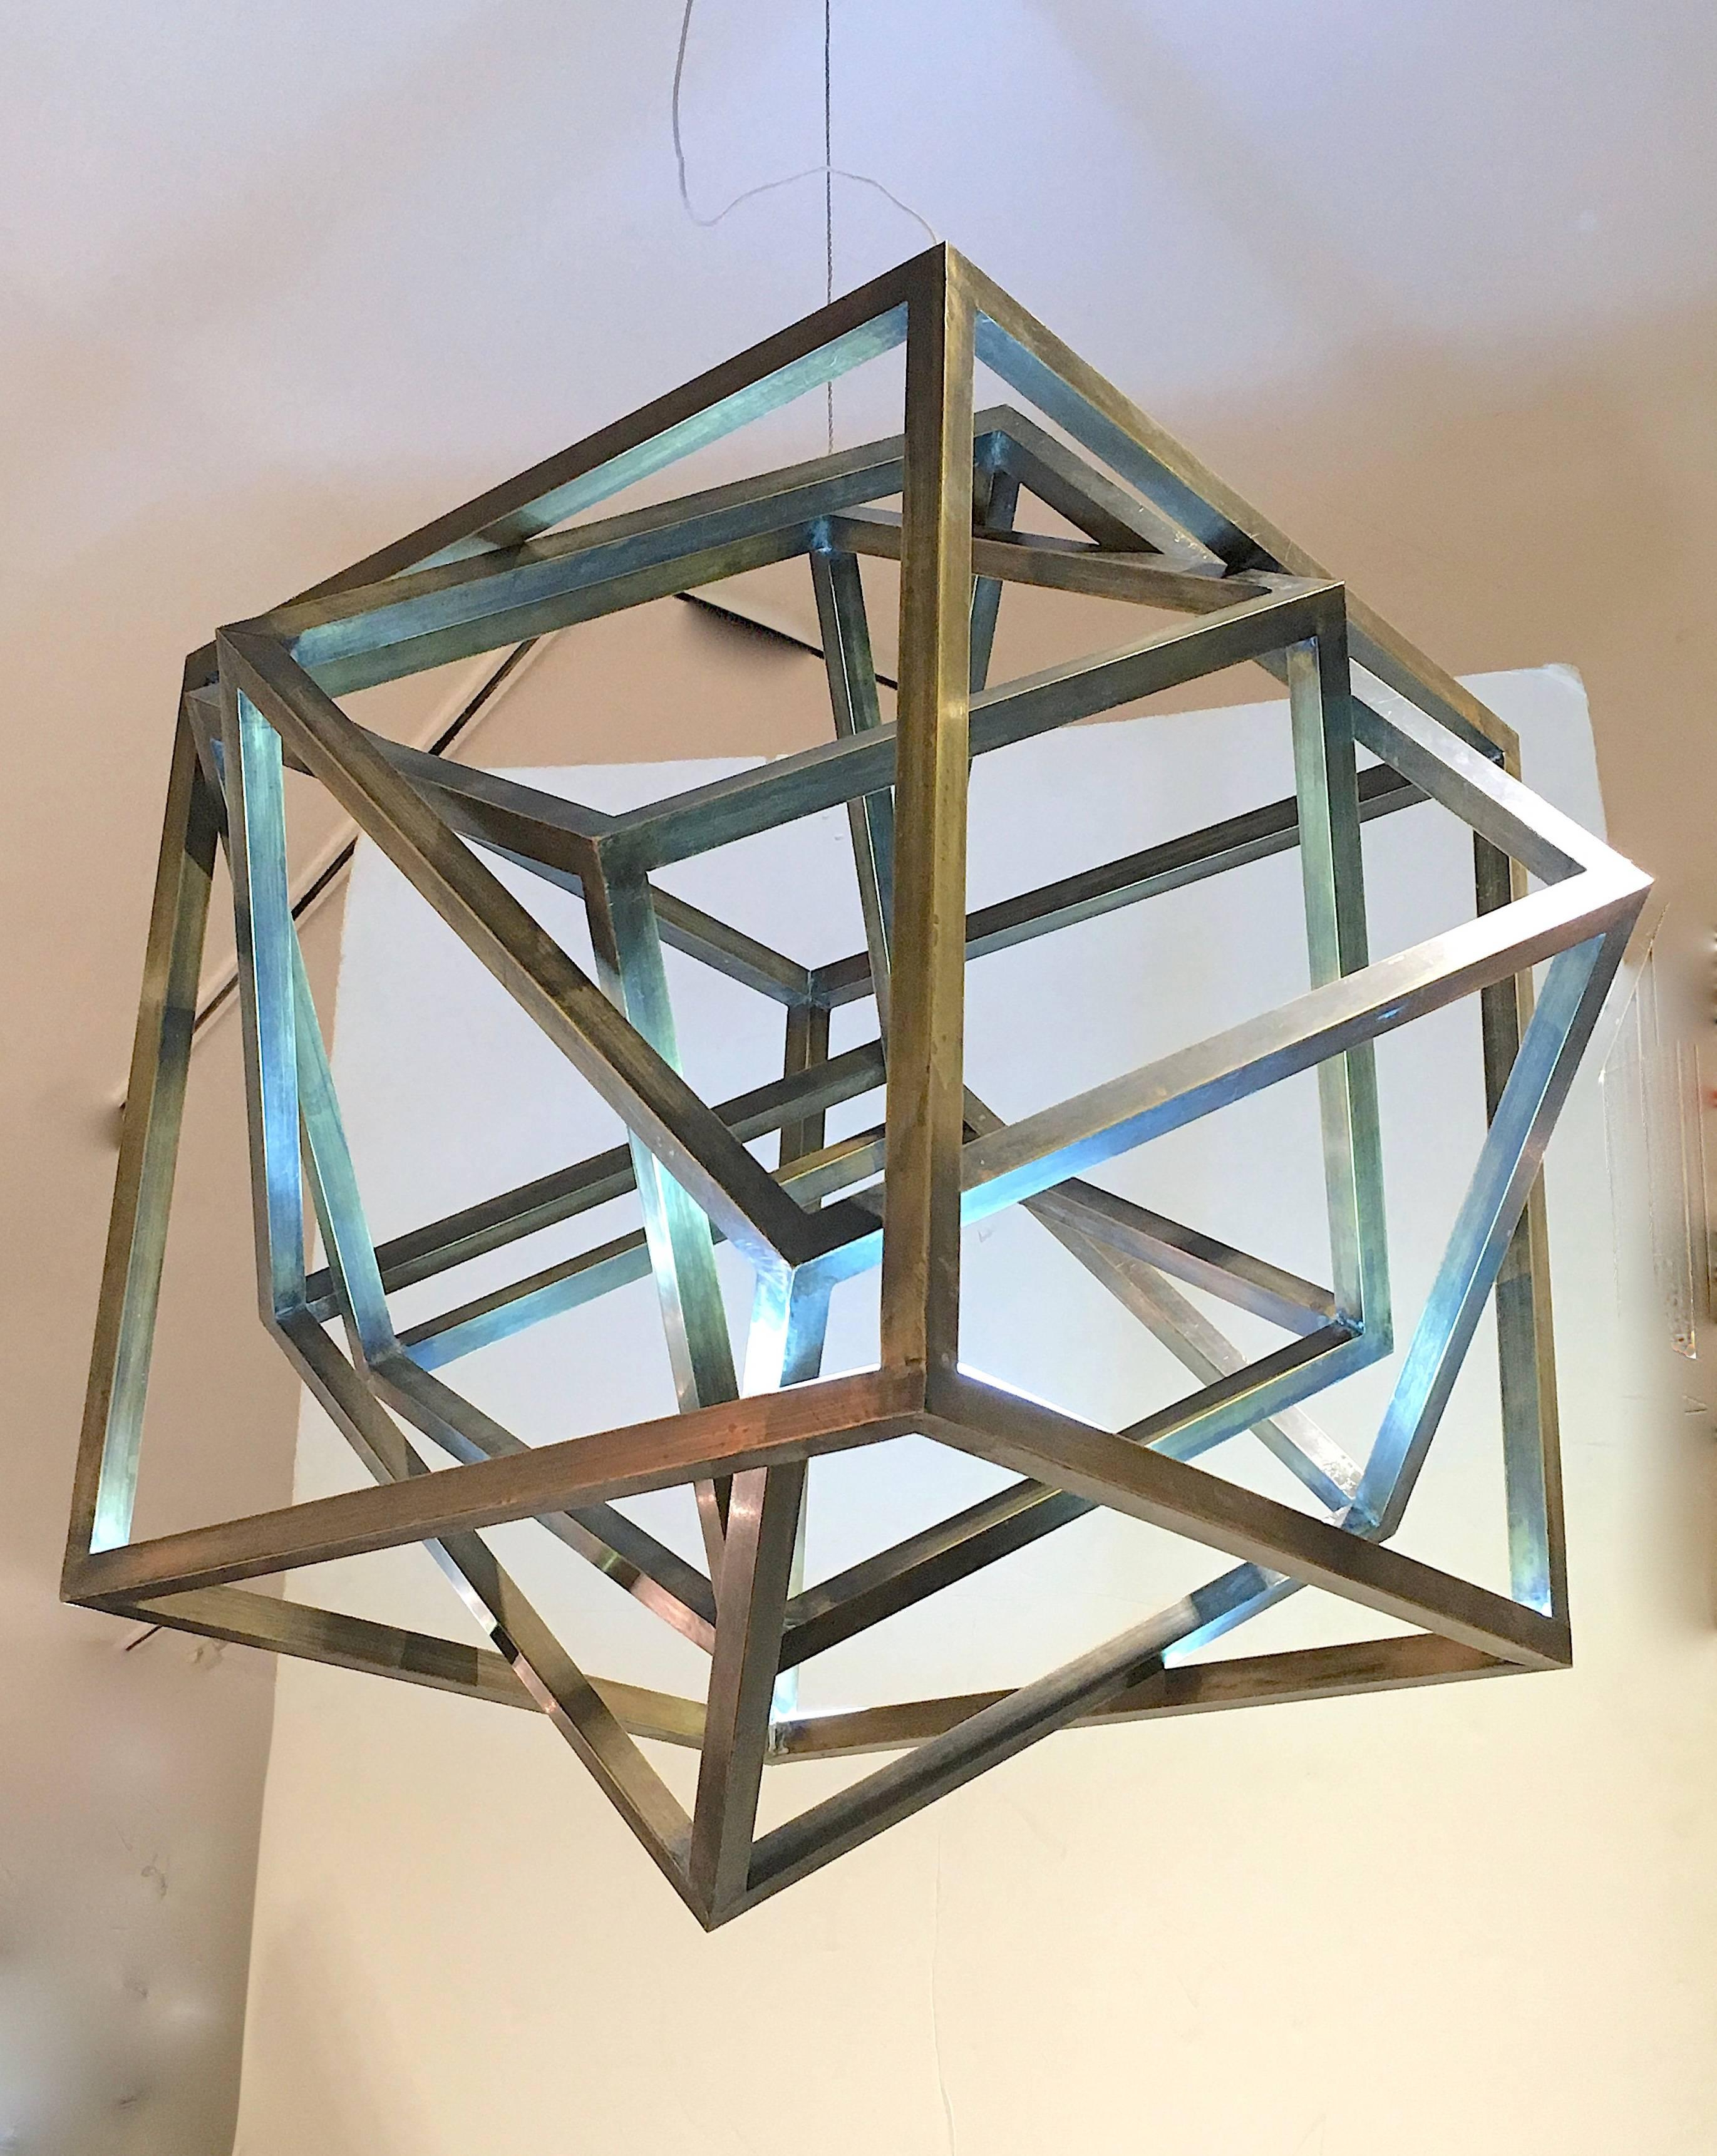 Striking architecturally designed chandelier composed of a number of brass finished square cubing elements entirely interlocked. The light fixture is in a versatile scale. The pendant is finished in bronzed, patinated brass and is illuminated by